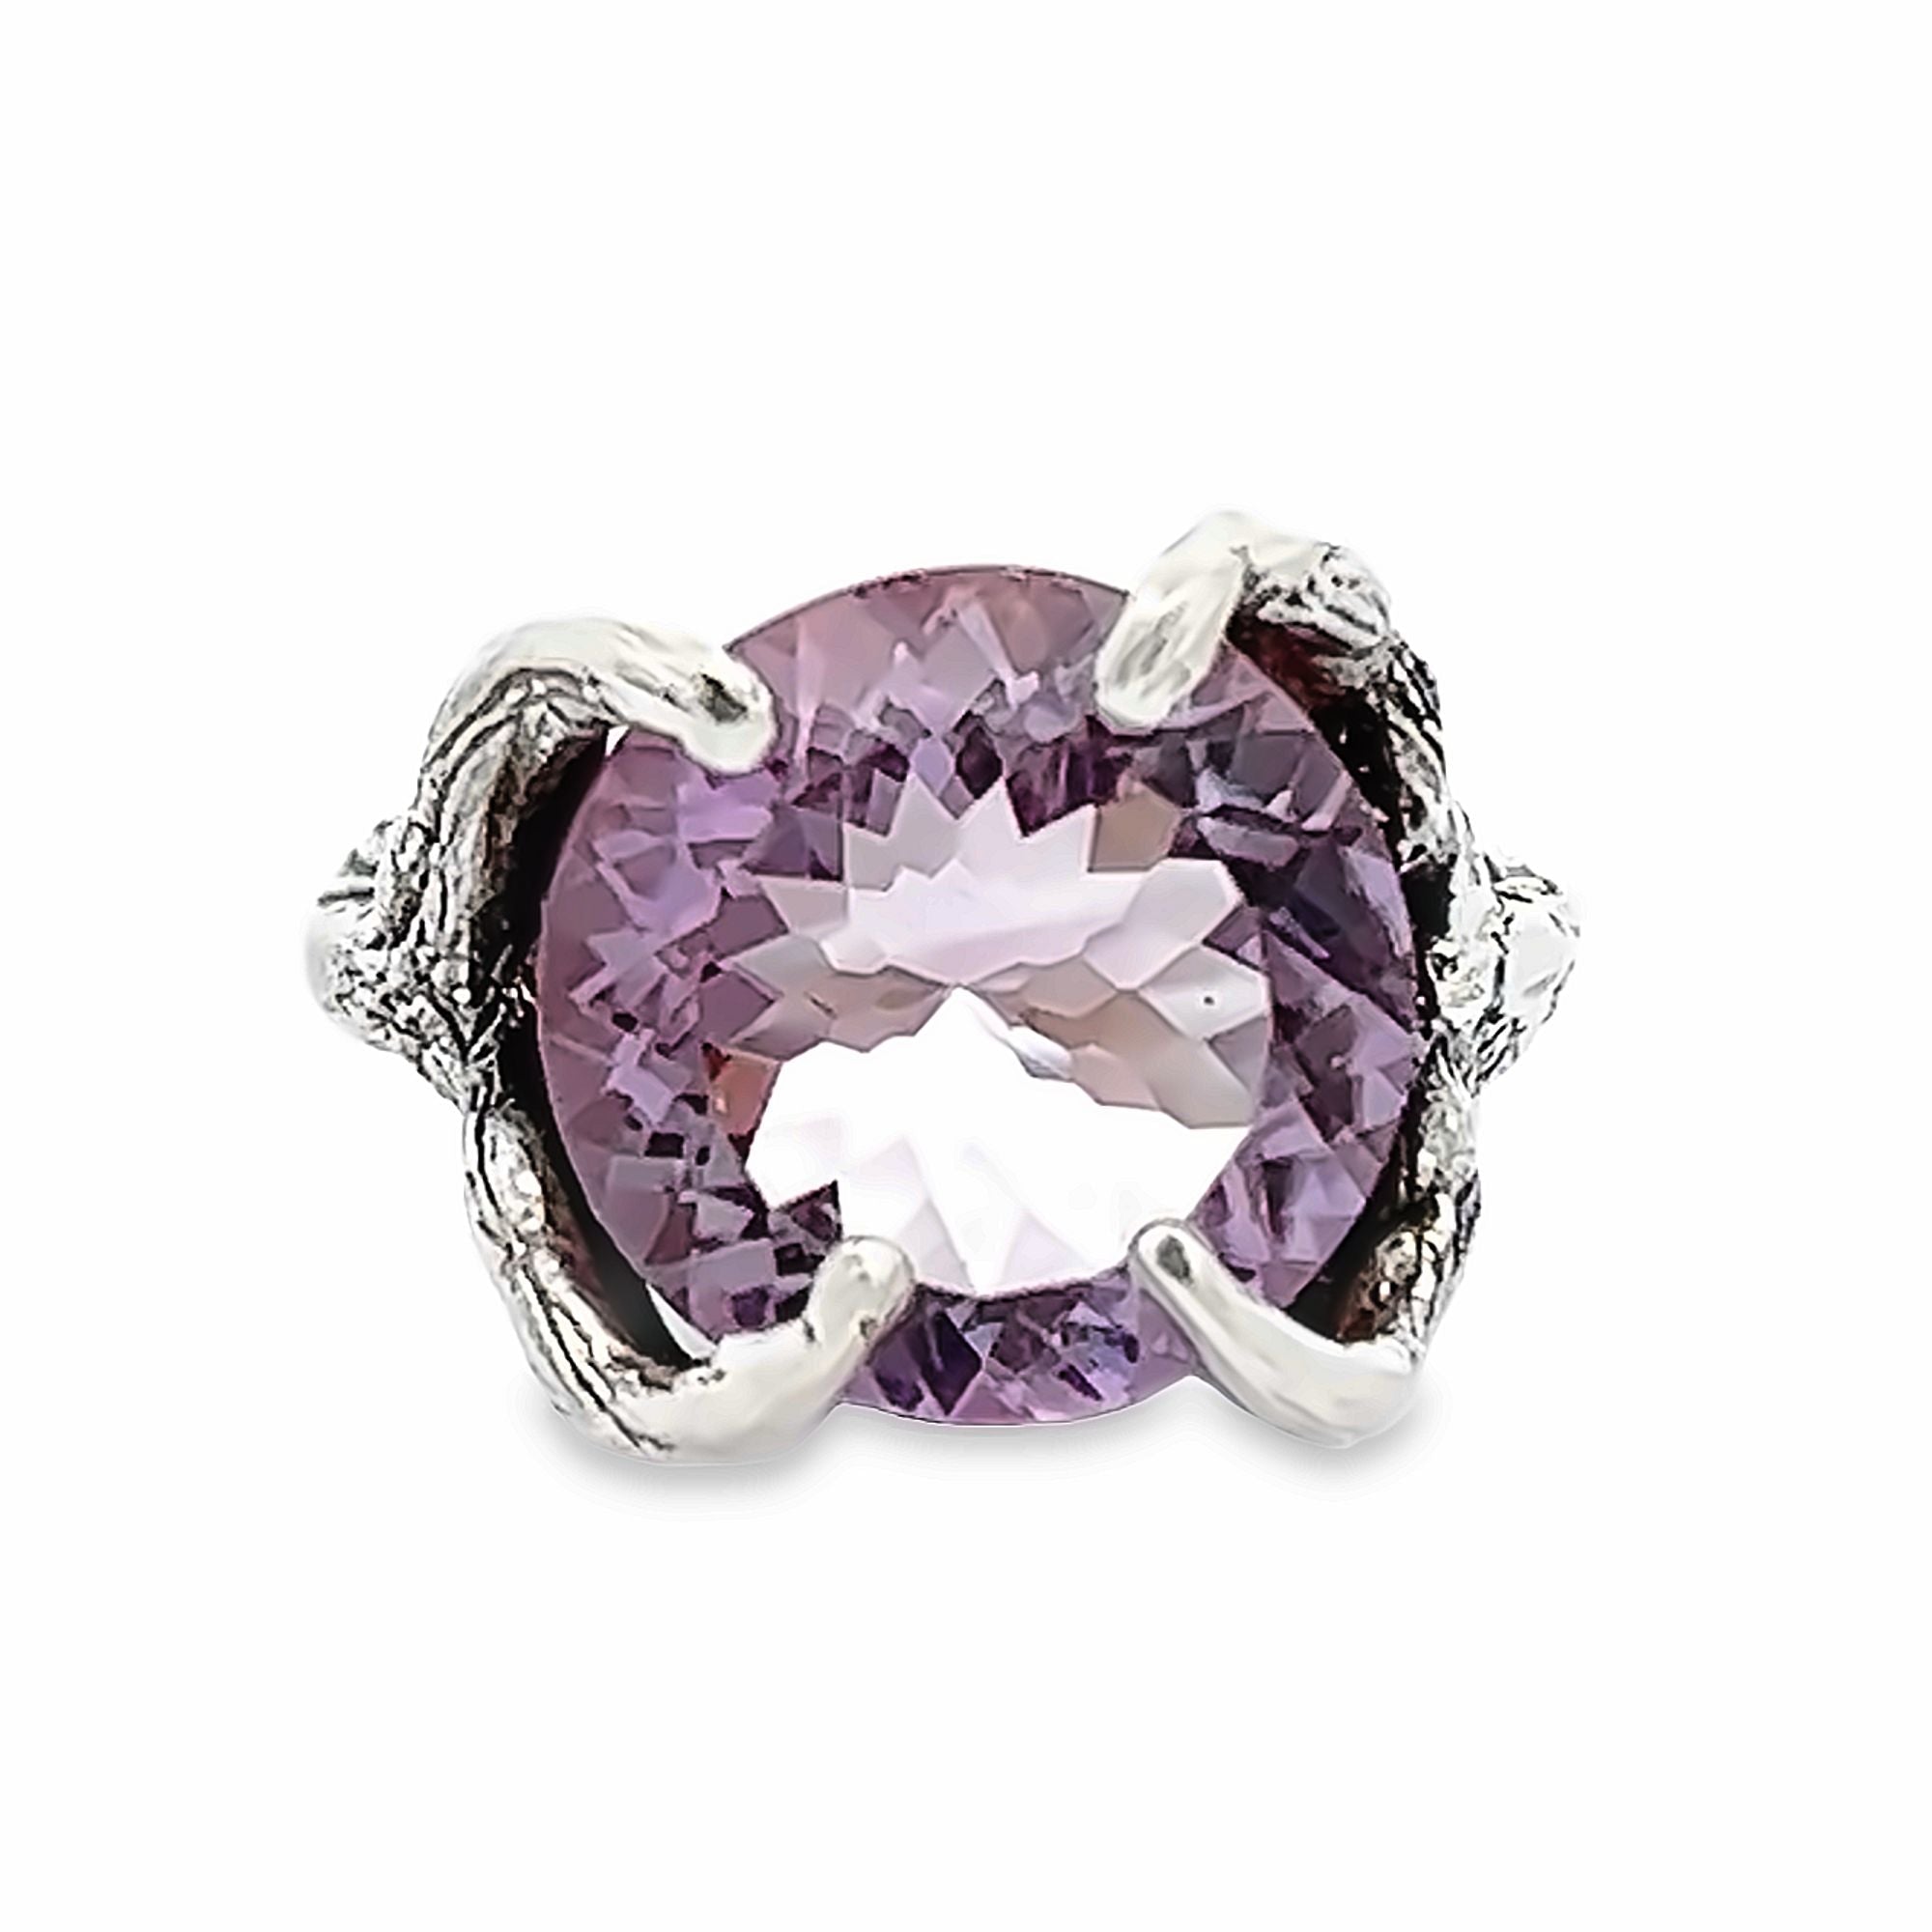 8.5 Ct Cushion Cut Amethyst Sterling Silver Cocktail Ring